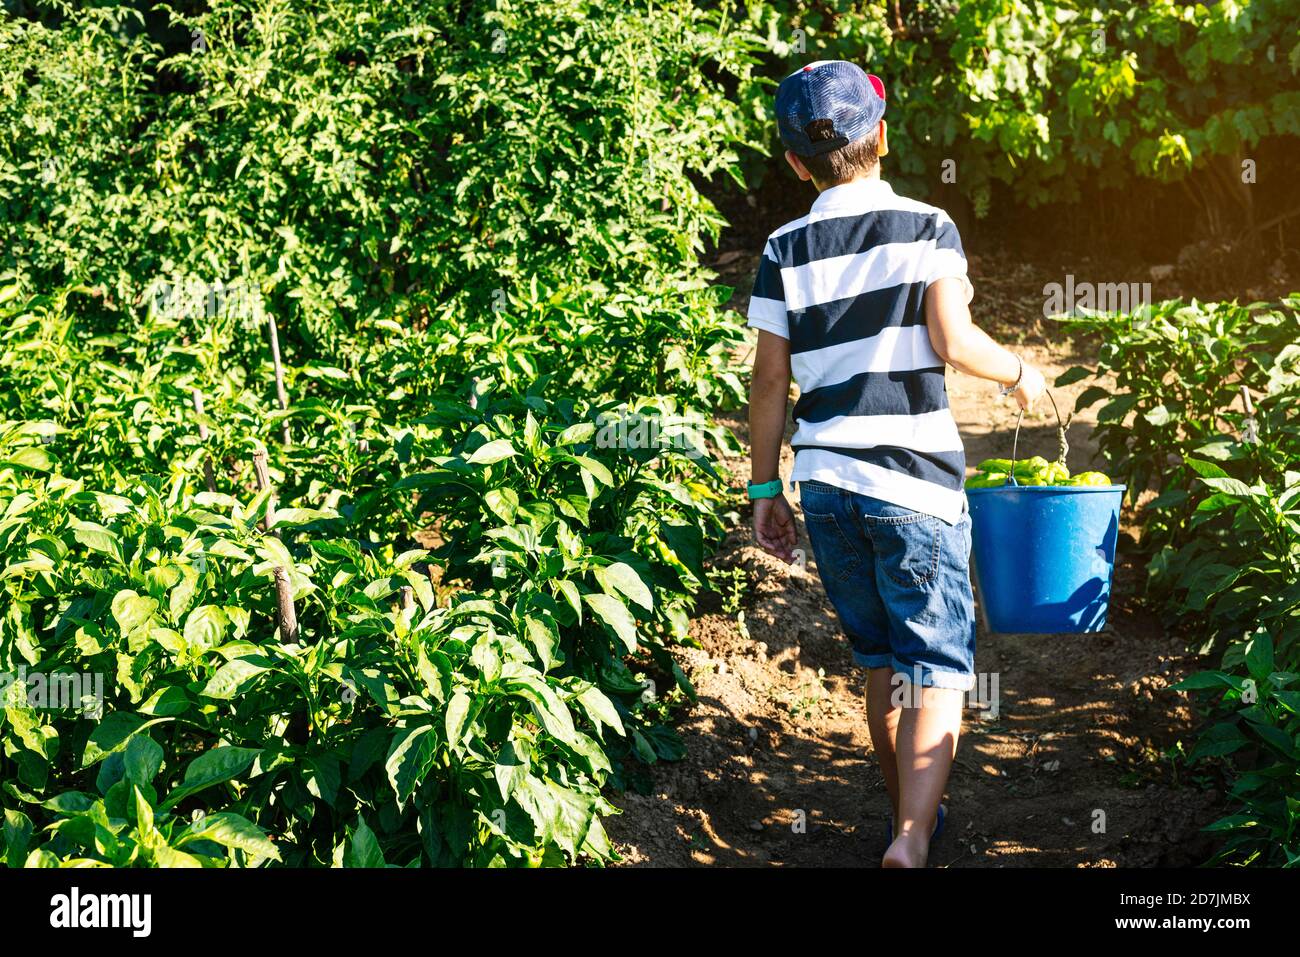 Boy carrying bucket with peppers while walking amidst plants in vegetable garden Stock Photo